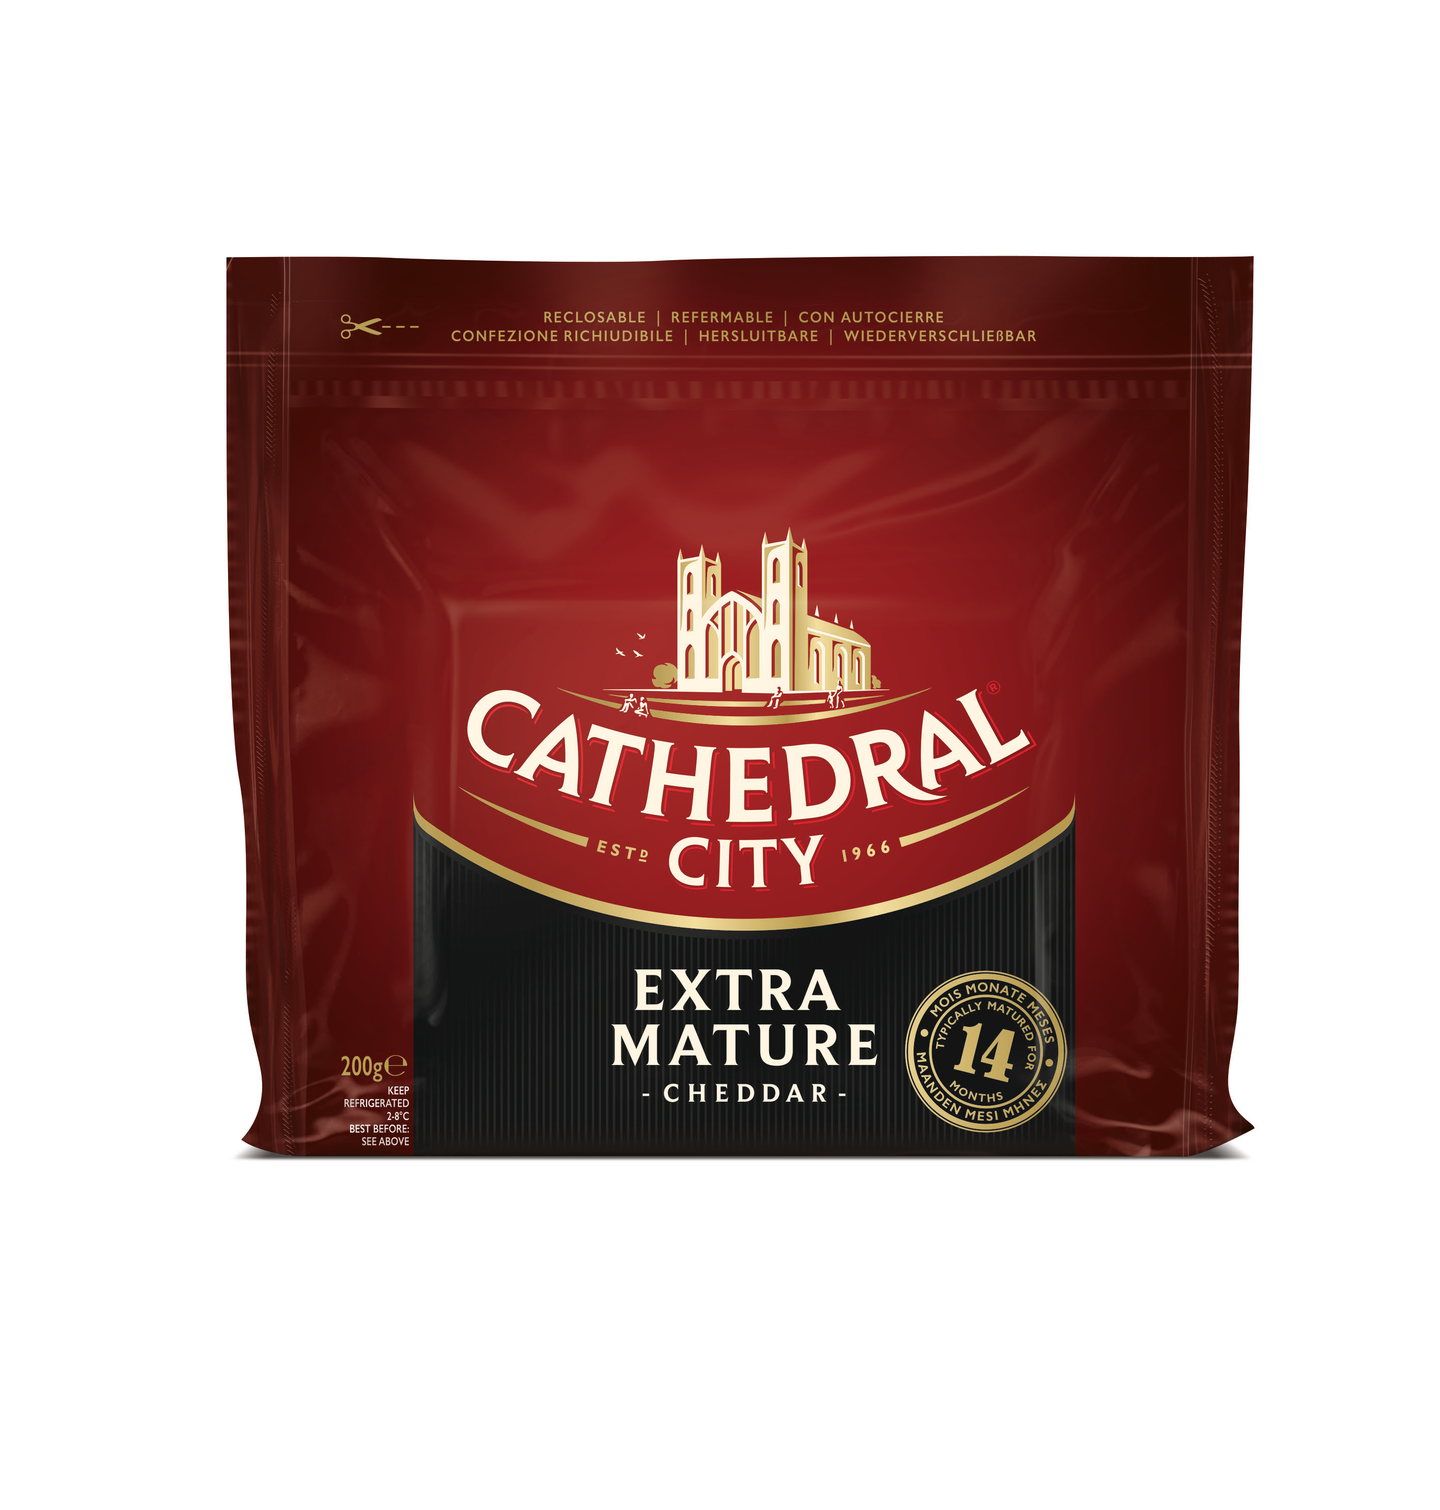 Cathedral City cheddar 200g extra mature